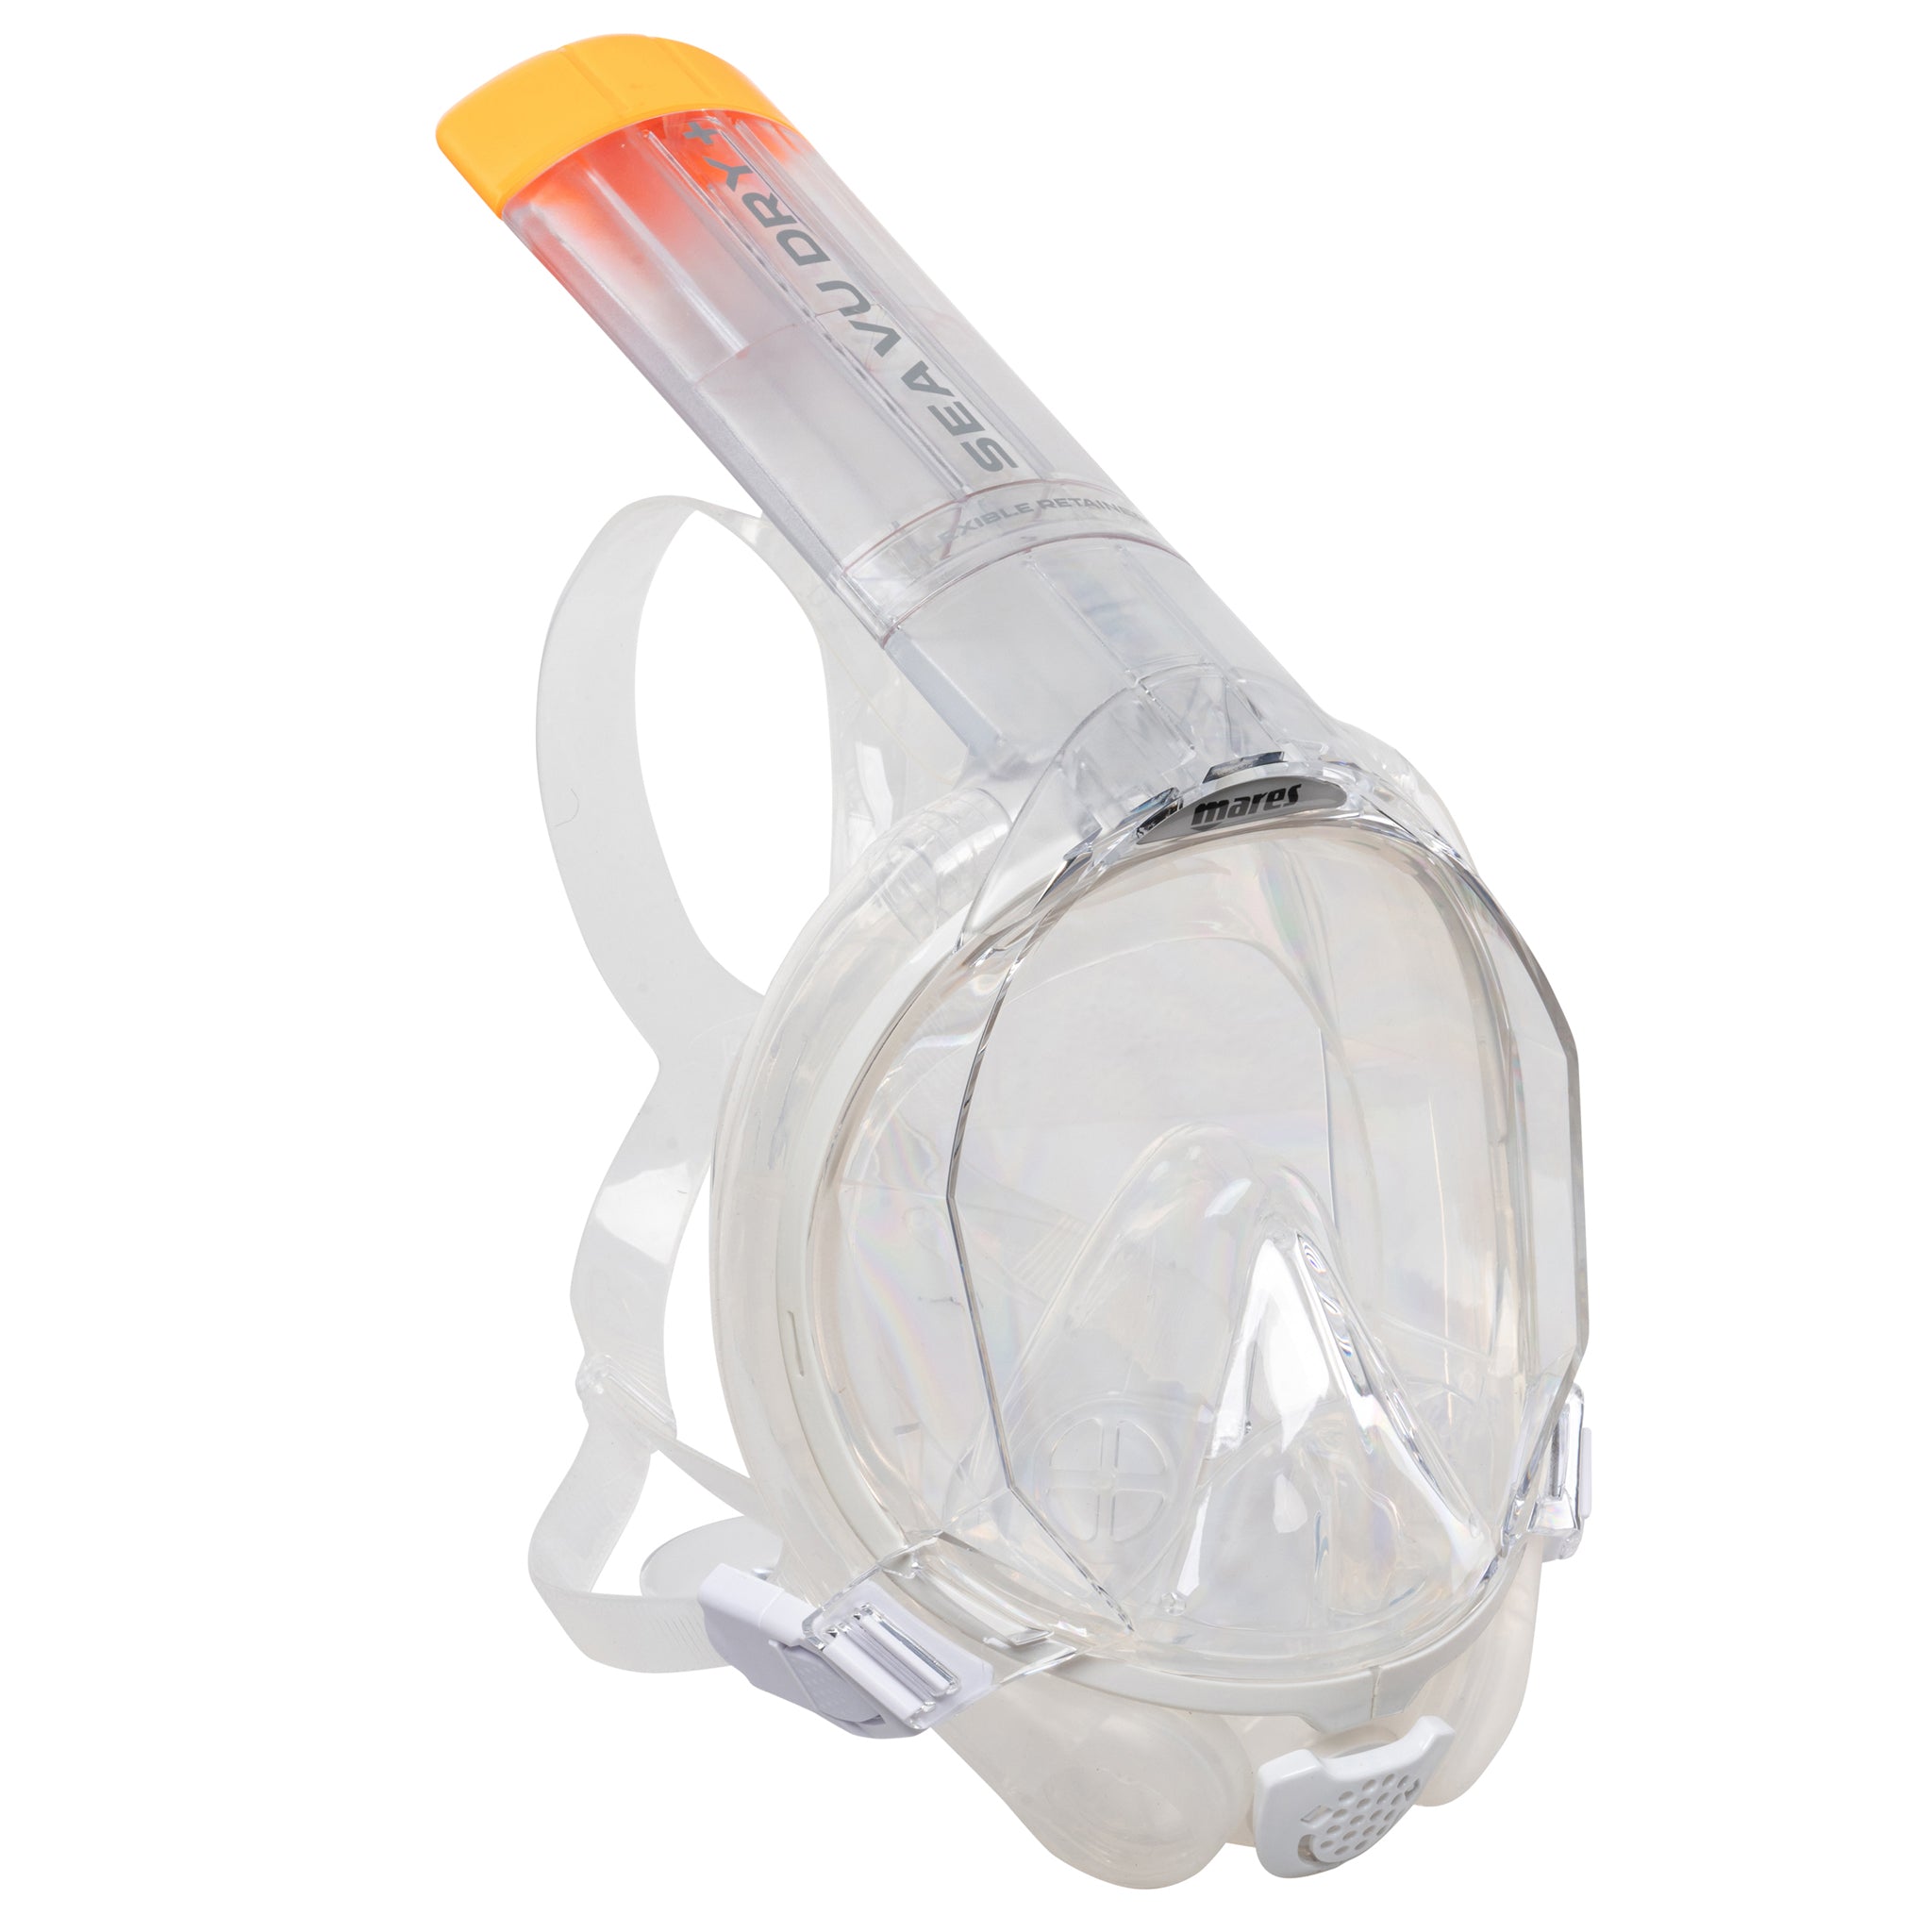 Mares Sea Vu Dry+ Full Face Snorkelling Mask | Clear/Clear